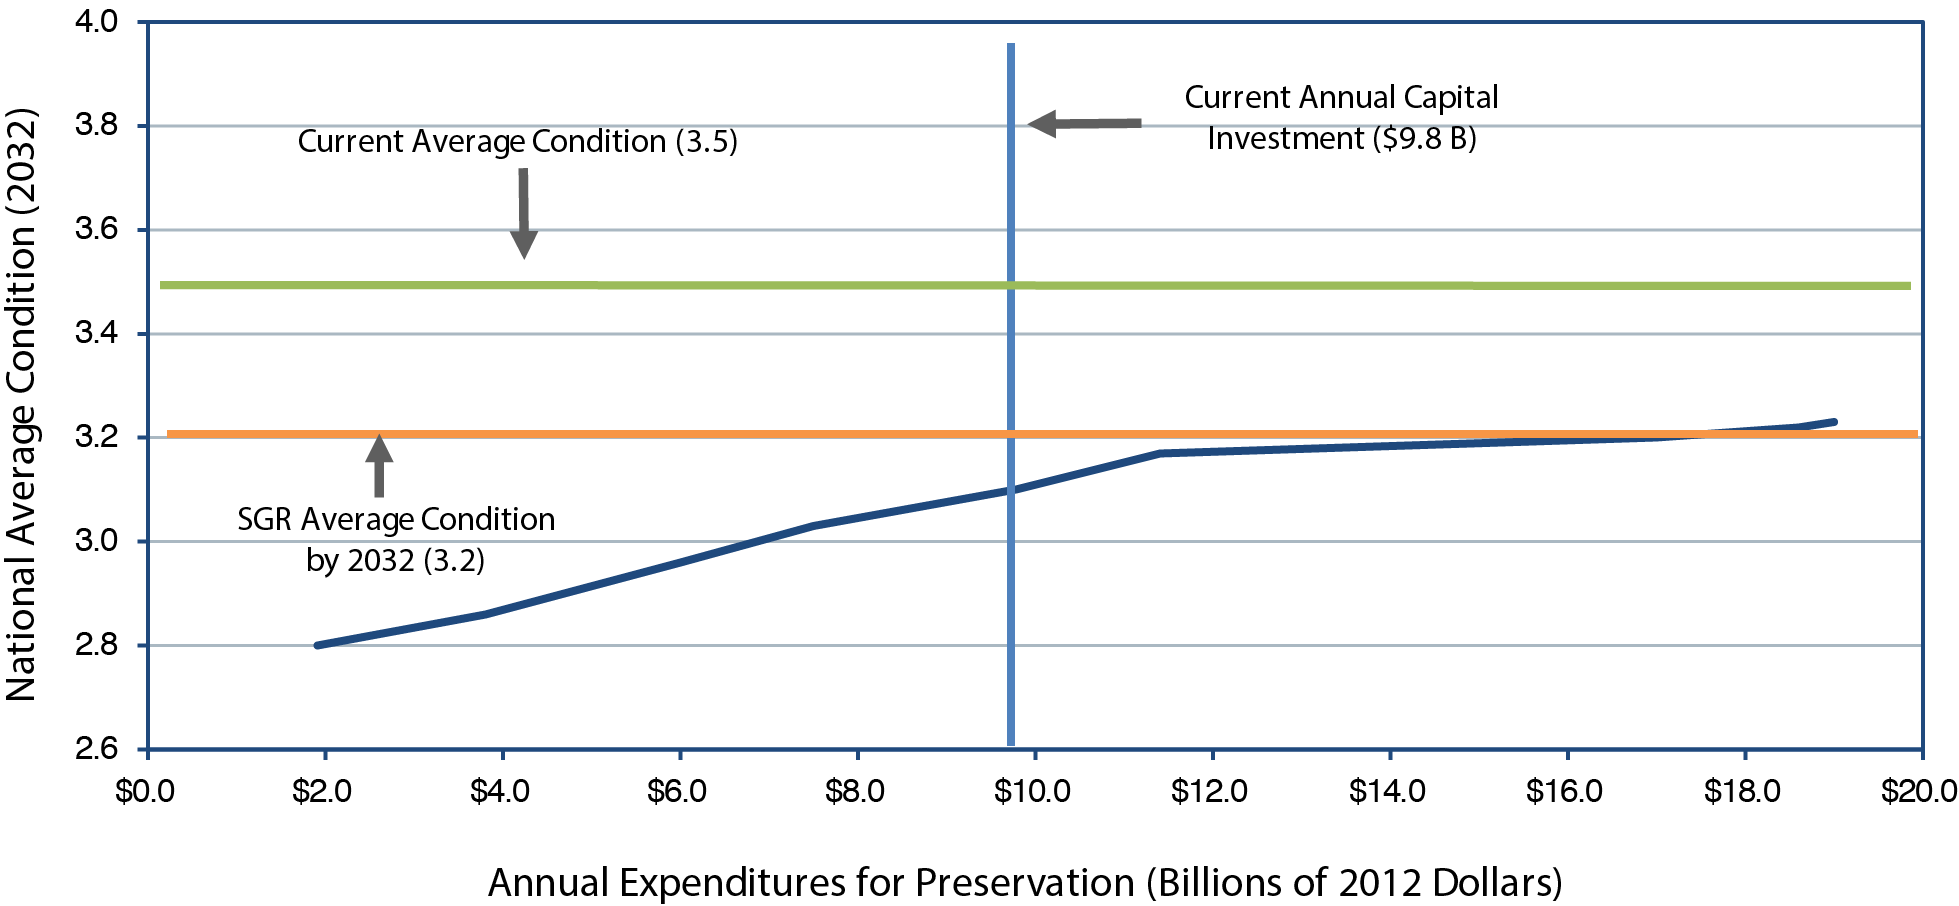 A line chart plots national average condition rating over annual expenditures in billions of dollars. The average transit condition in 2032 has a rating of 2.80 at an annual investment expenditure of $1.9 billion. The plot trends steadily upward to a rating of 3.17 at an annual investment expenditure of $11.4 billion, and continues upward at a slower rate to a rating of 3.23 at an annual expenditure of $19.0 billion. The plot intersects with the rating 3.20 at the current annual capital investment amount of $17.0 billion. The plot ends at a rating value of 3.23, short of the current average condition rating of 3.5, with an expenditure of $19 billion. Source: Transit Economic Requirements Model.